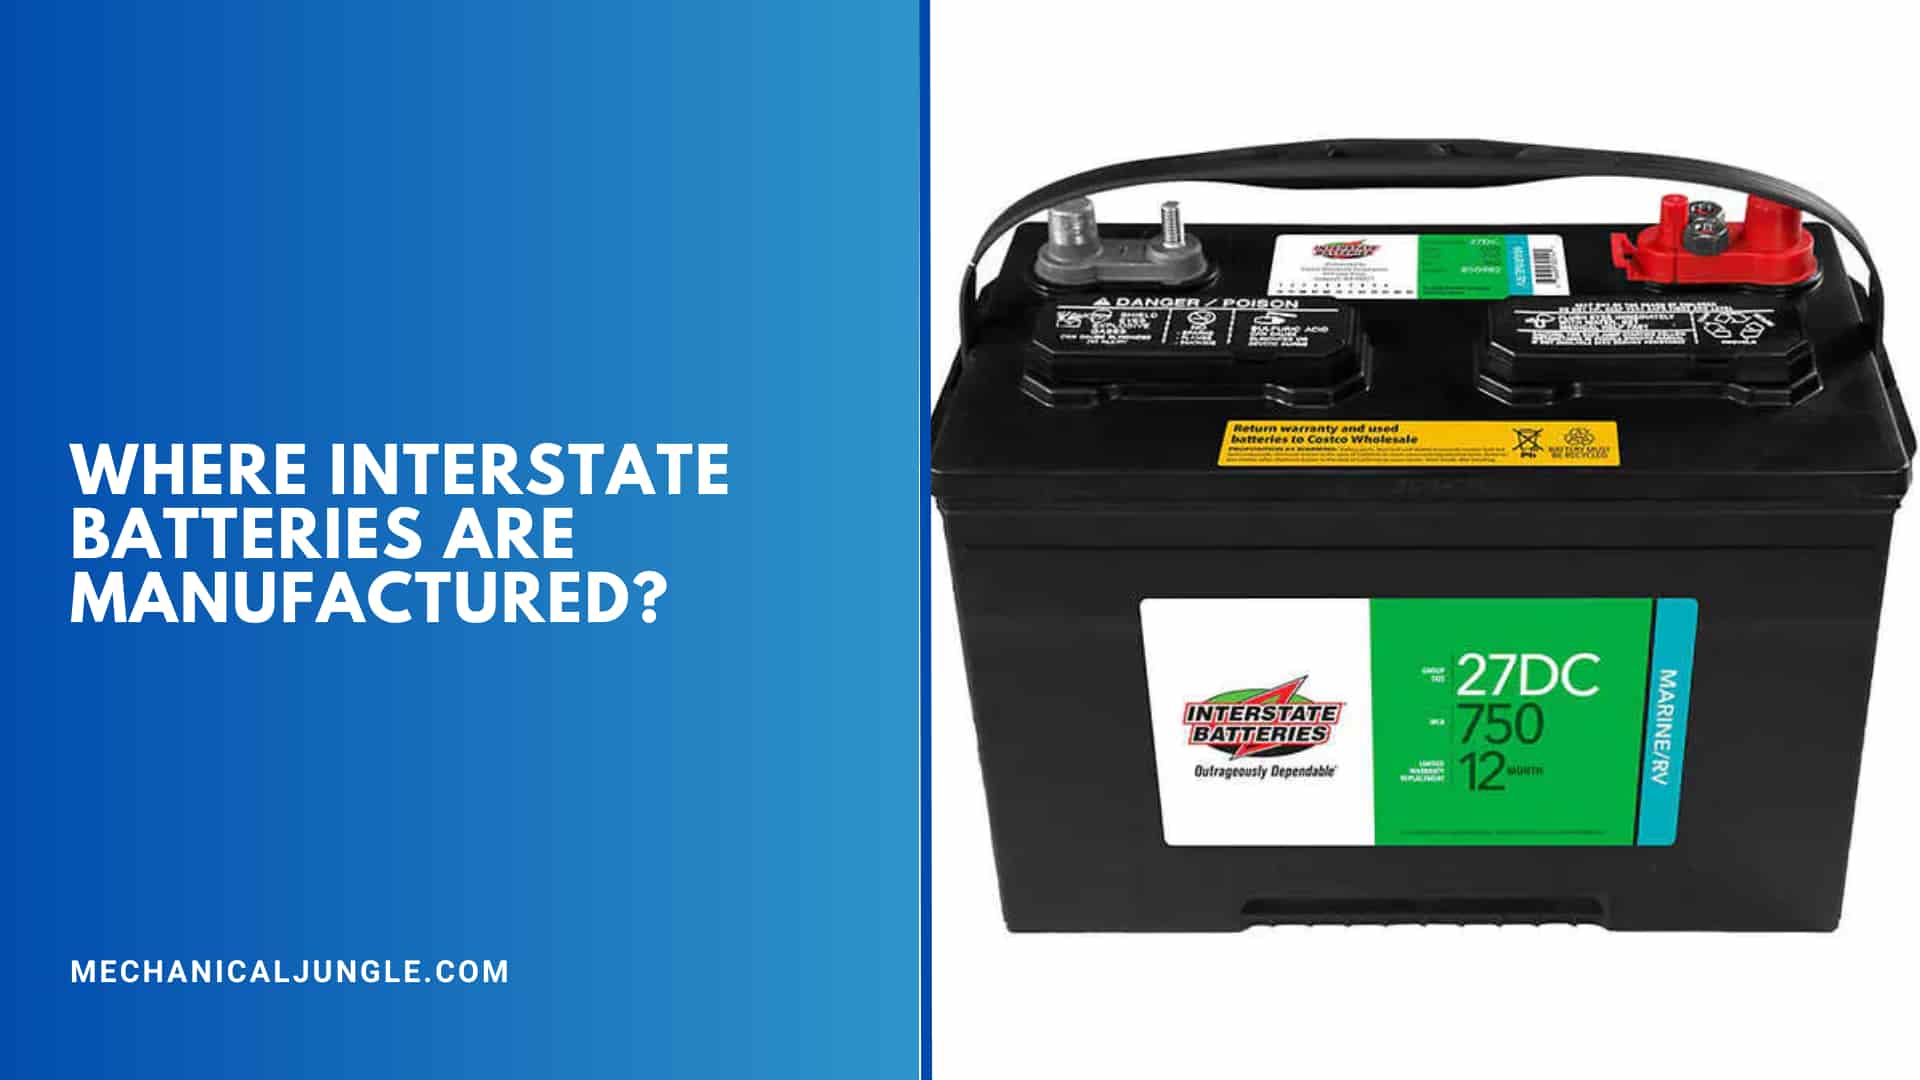 Where Interstate Batteries Are Manufactured?